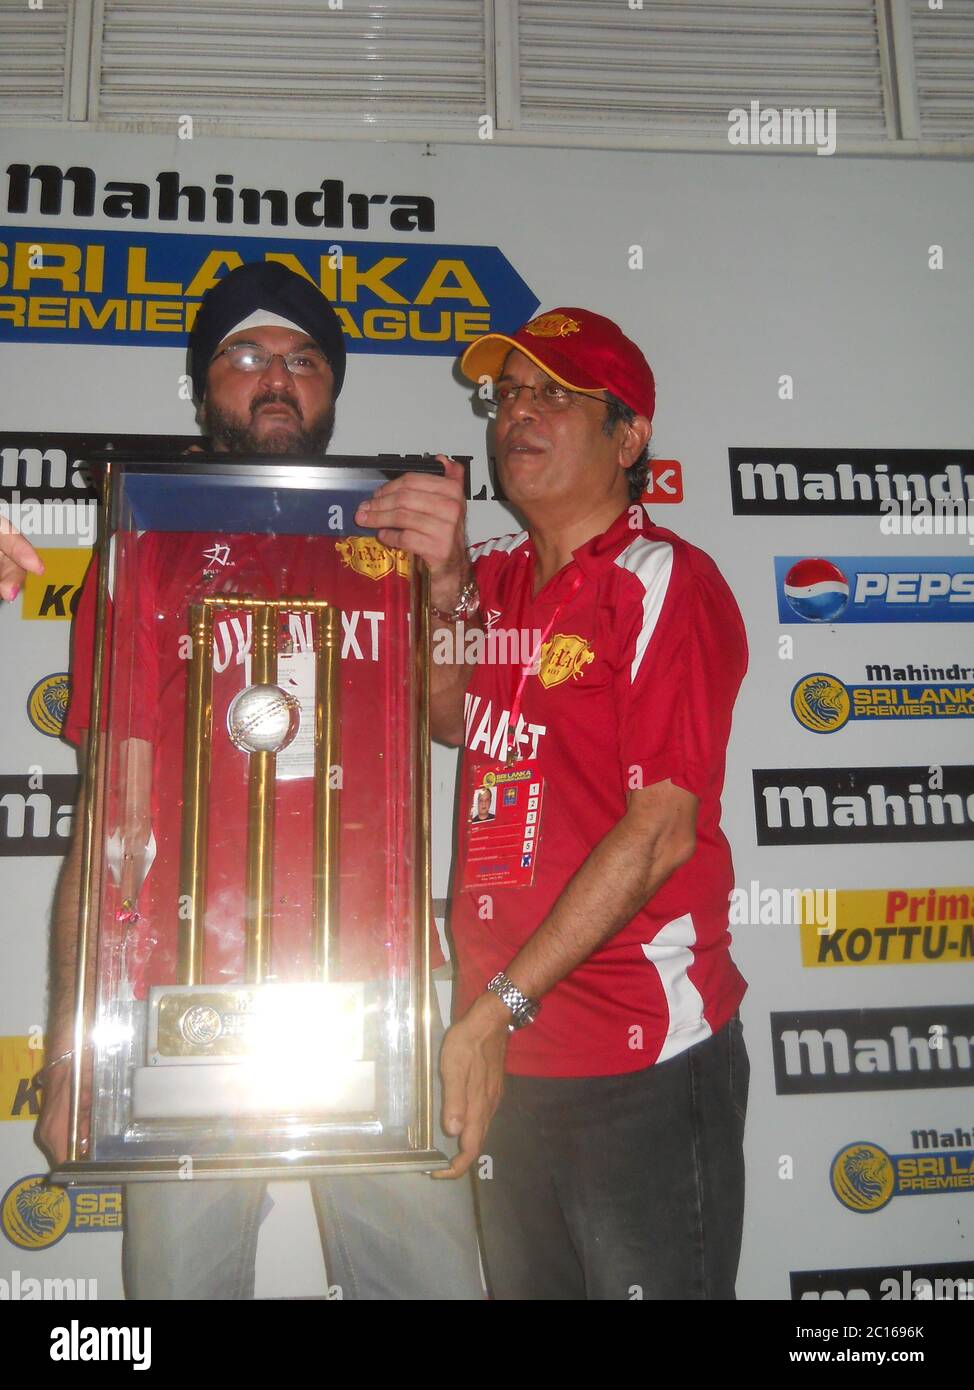 The management posing for a photograph with the champion’s trophy. The UVA Next franchise were the champions of the 1st Sri Lanka Premier League (SLPL Stock Photo